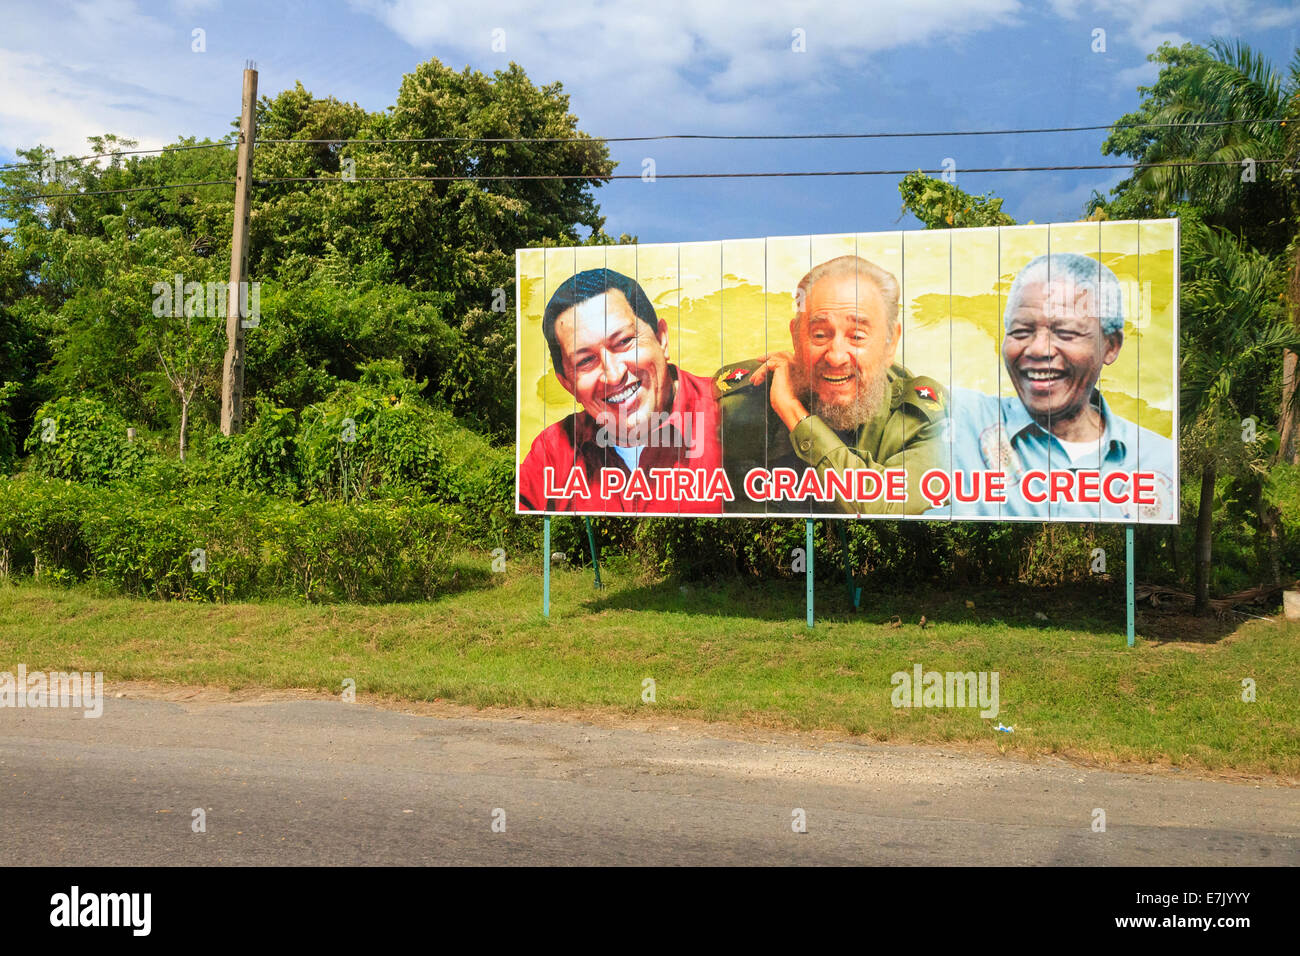 [Editorial Use Only] The portraits of Hugo Chávez, Fidel Castro and Nelson Mandela on a political billboard in Cuba Stock Photo